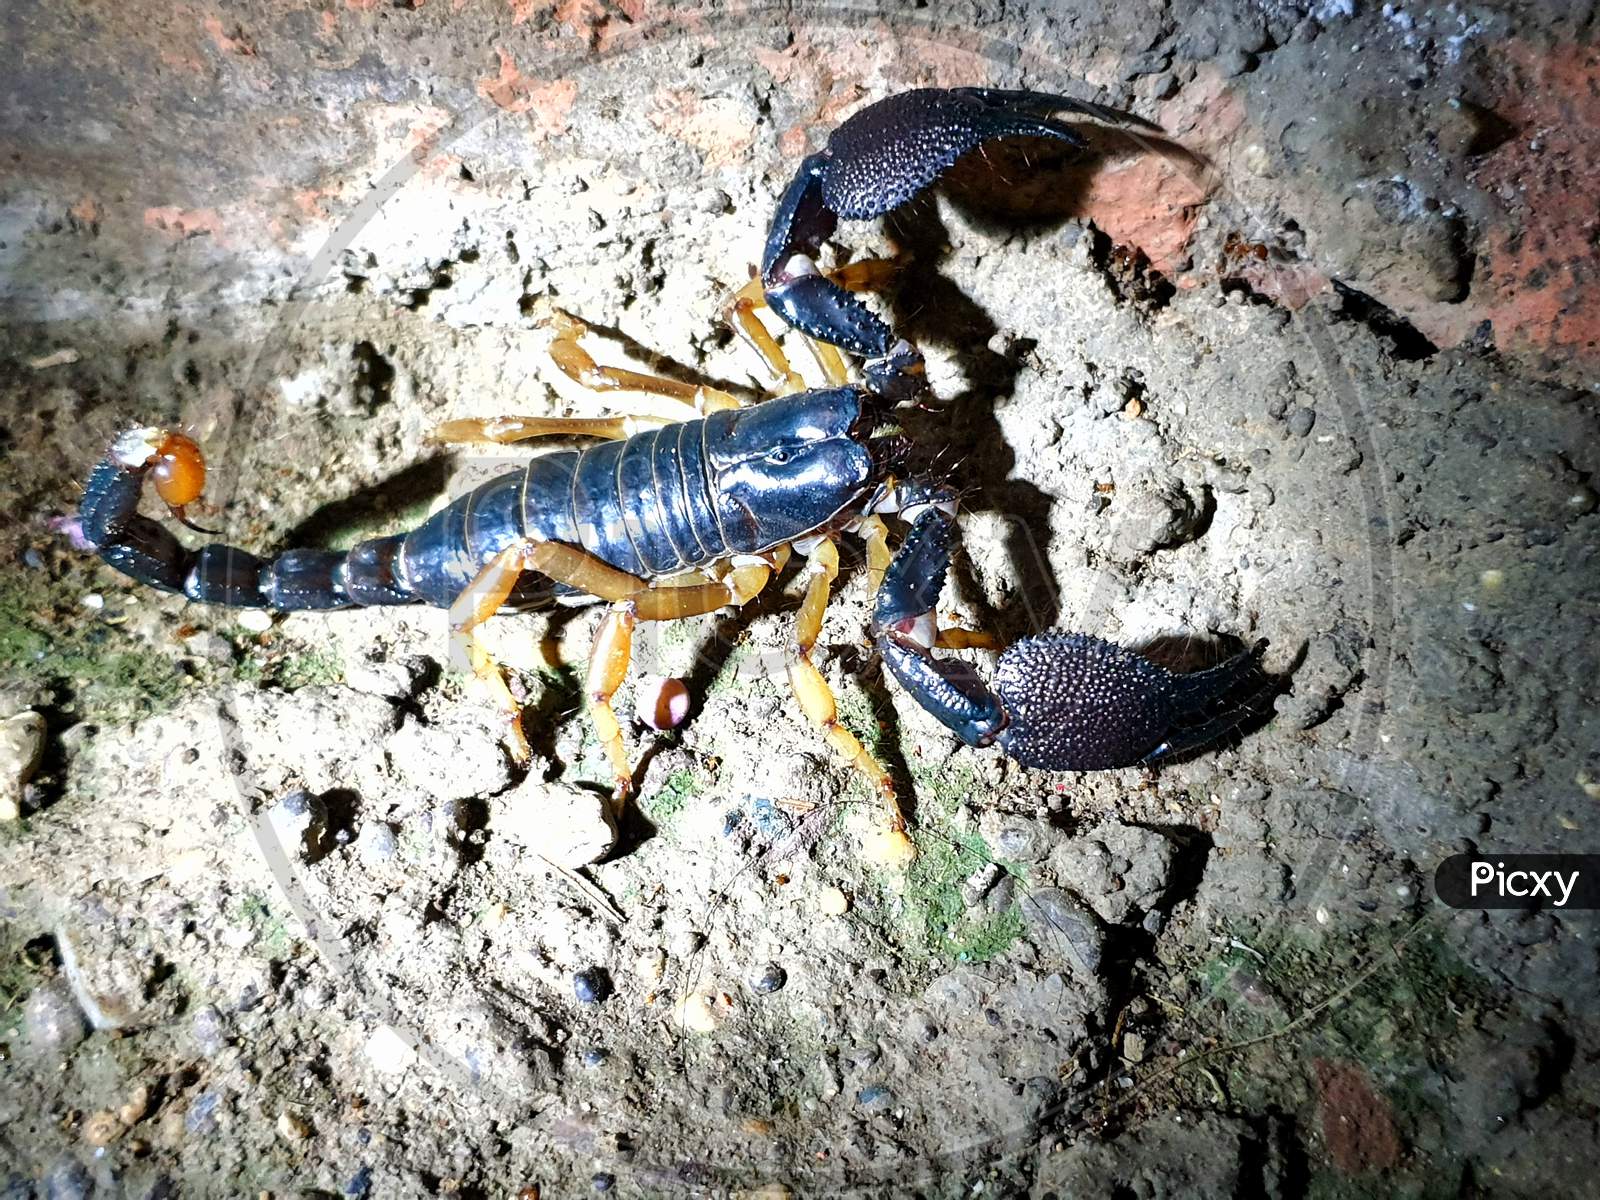 This is a black scorpion